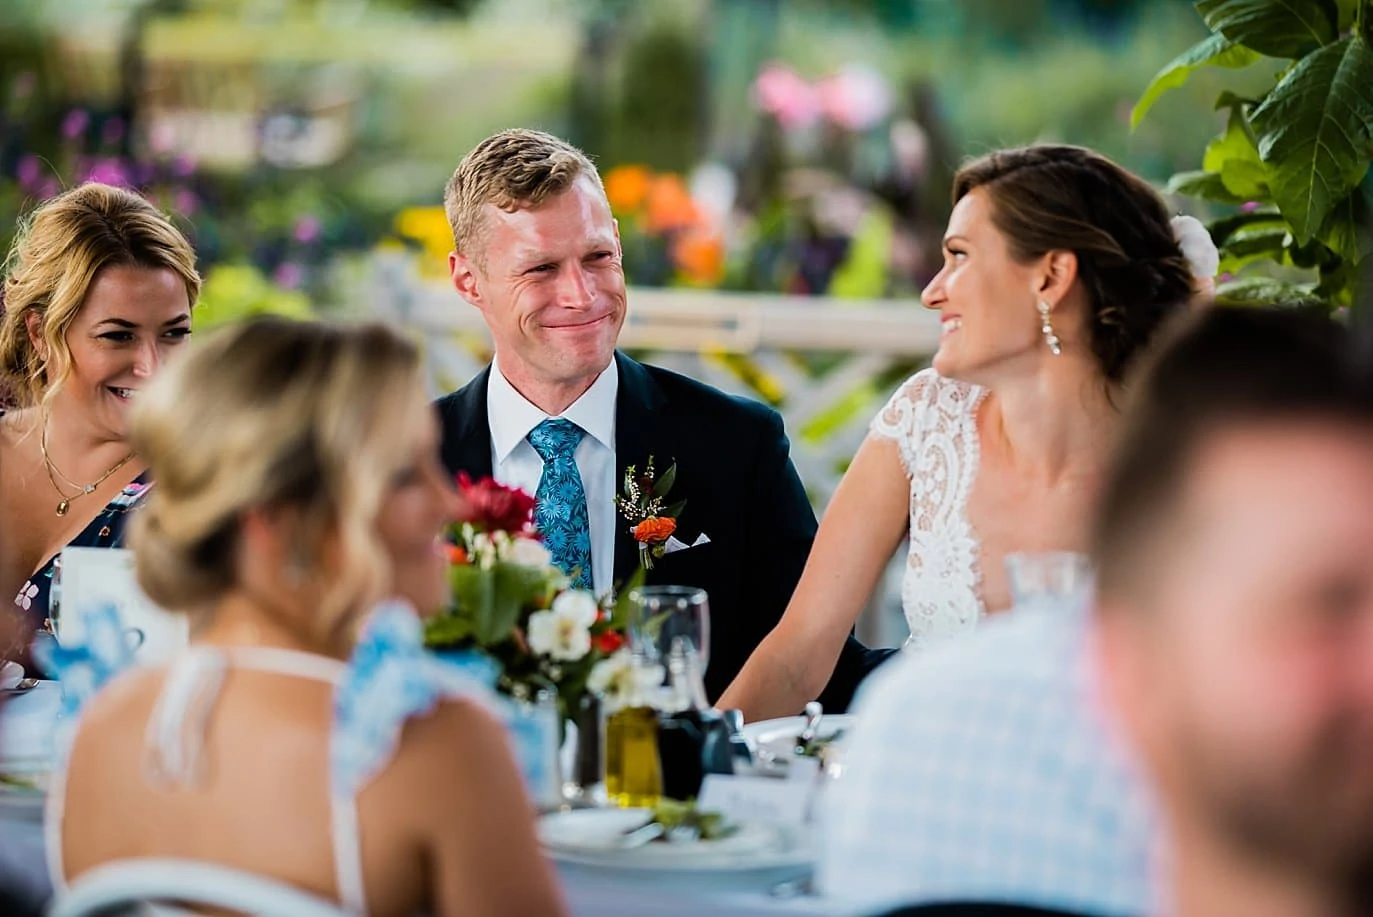 bride and groom smiling at each other during toasts in Annuals garden at Denver Botanic Gardens wedding by Aurora Wedding Photographer Jennie Crate